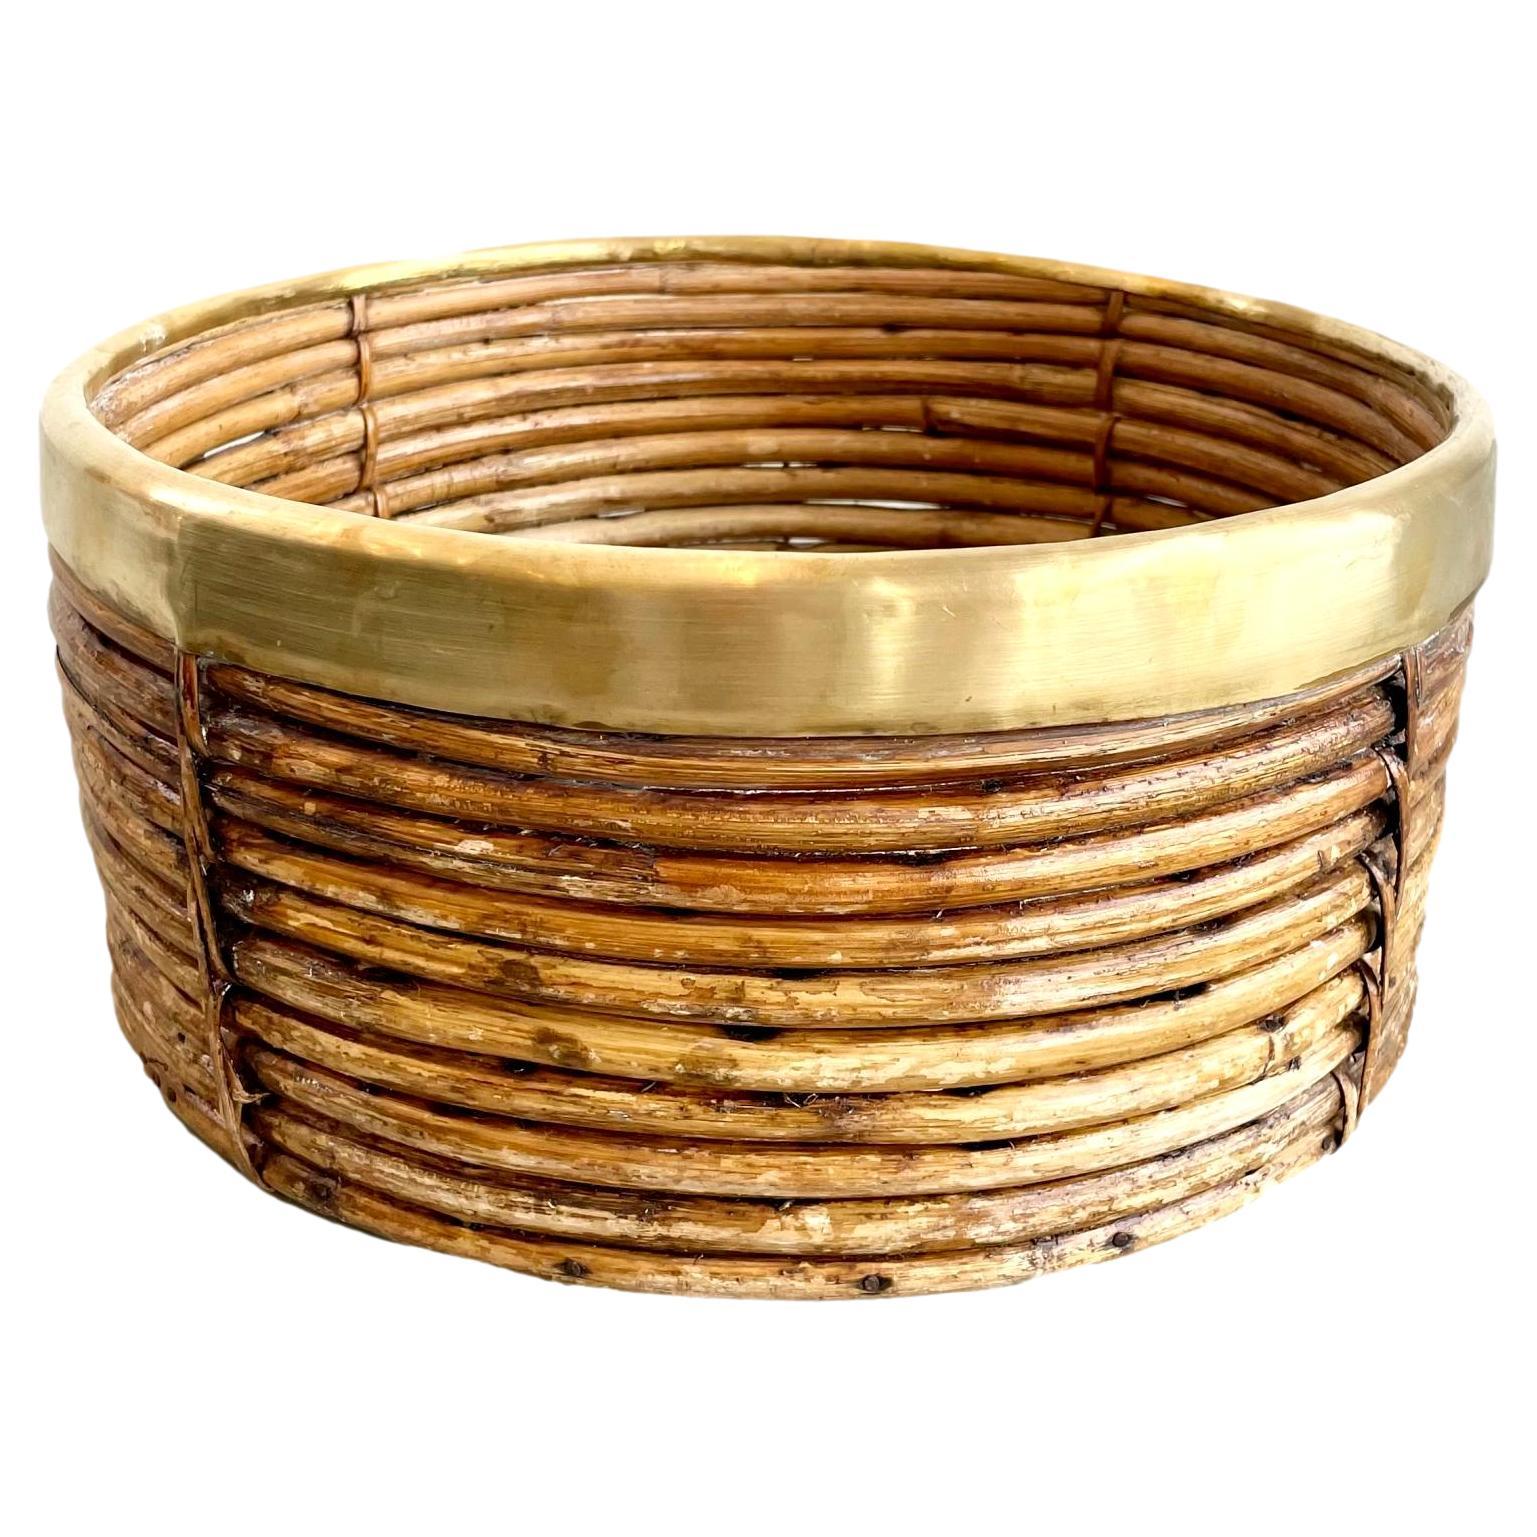 Rattan and Brass Bowl in the Style of Gabriella Crespi, 1960s Italy For Sale